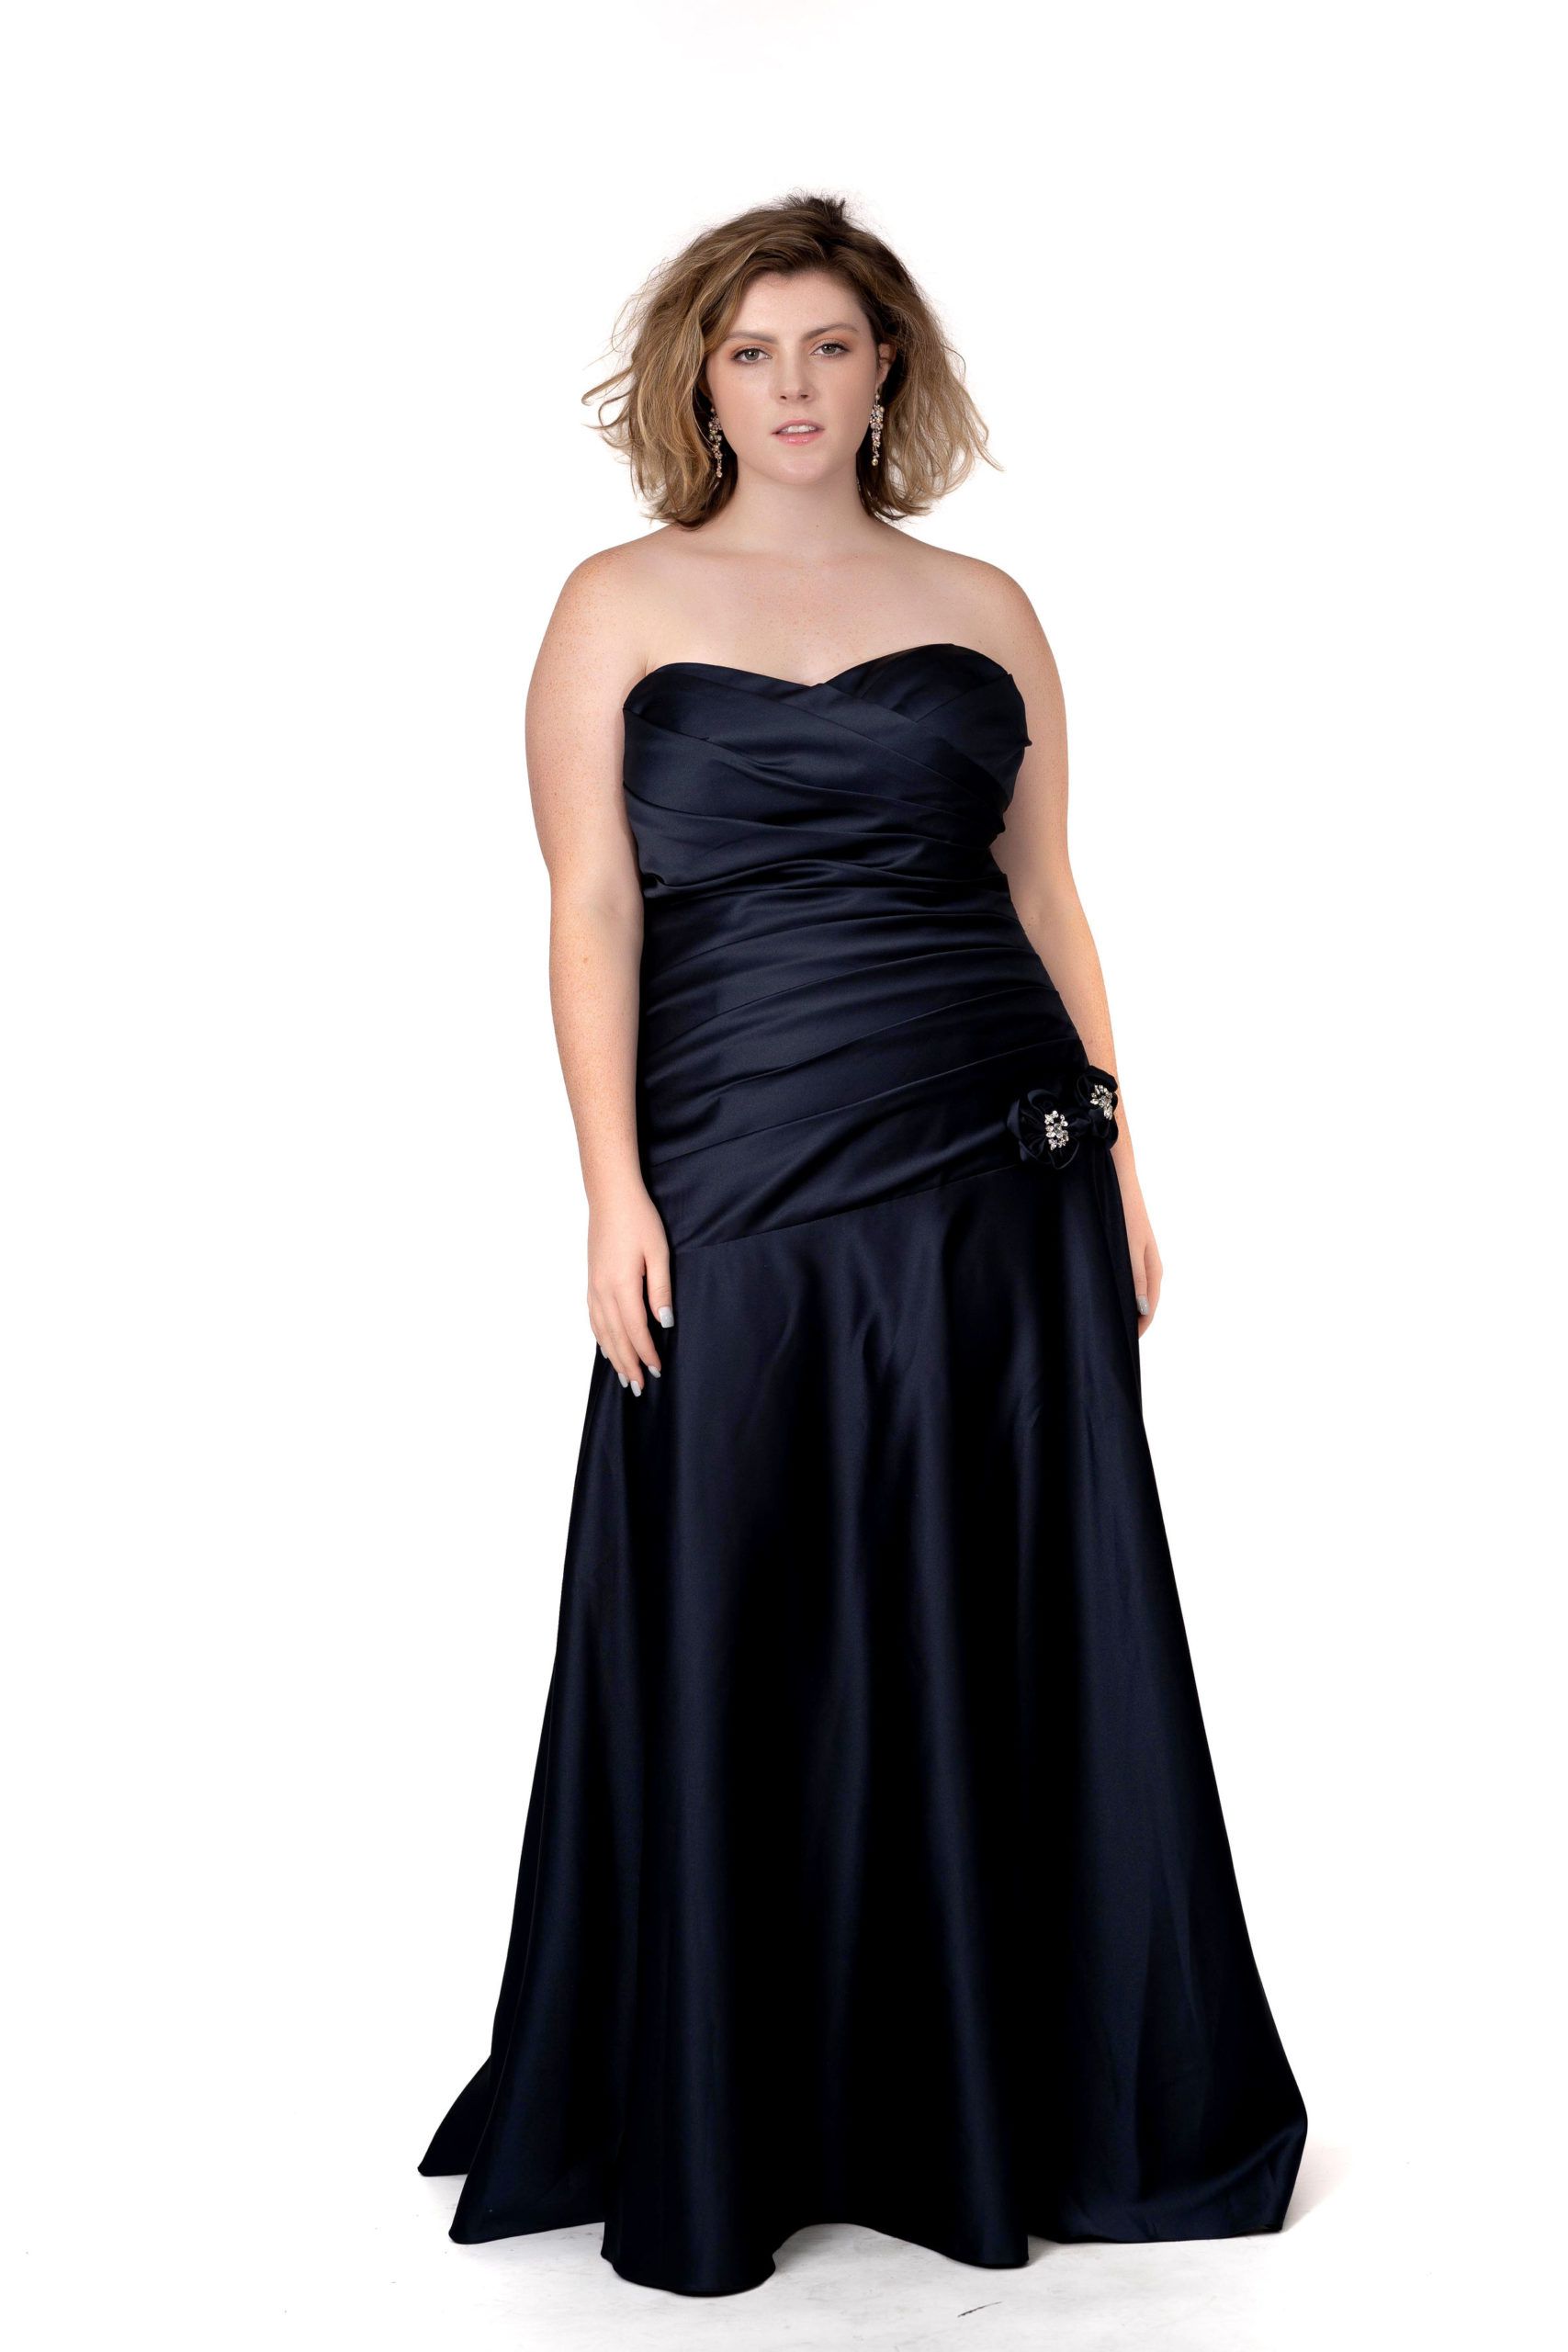 Style Peyton Socialite Fashions Plus Size 18 Prom Strapless Black Floor Length Maxi on Queenly